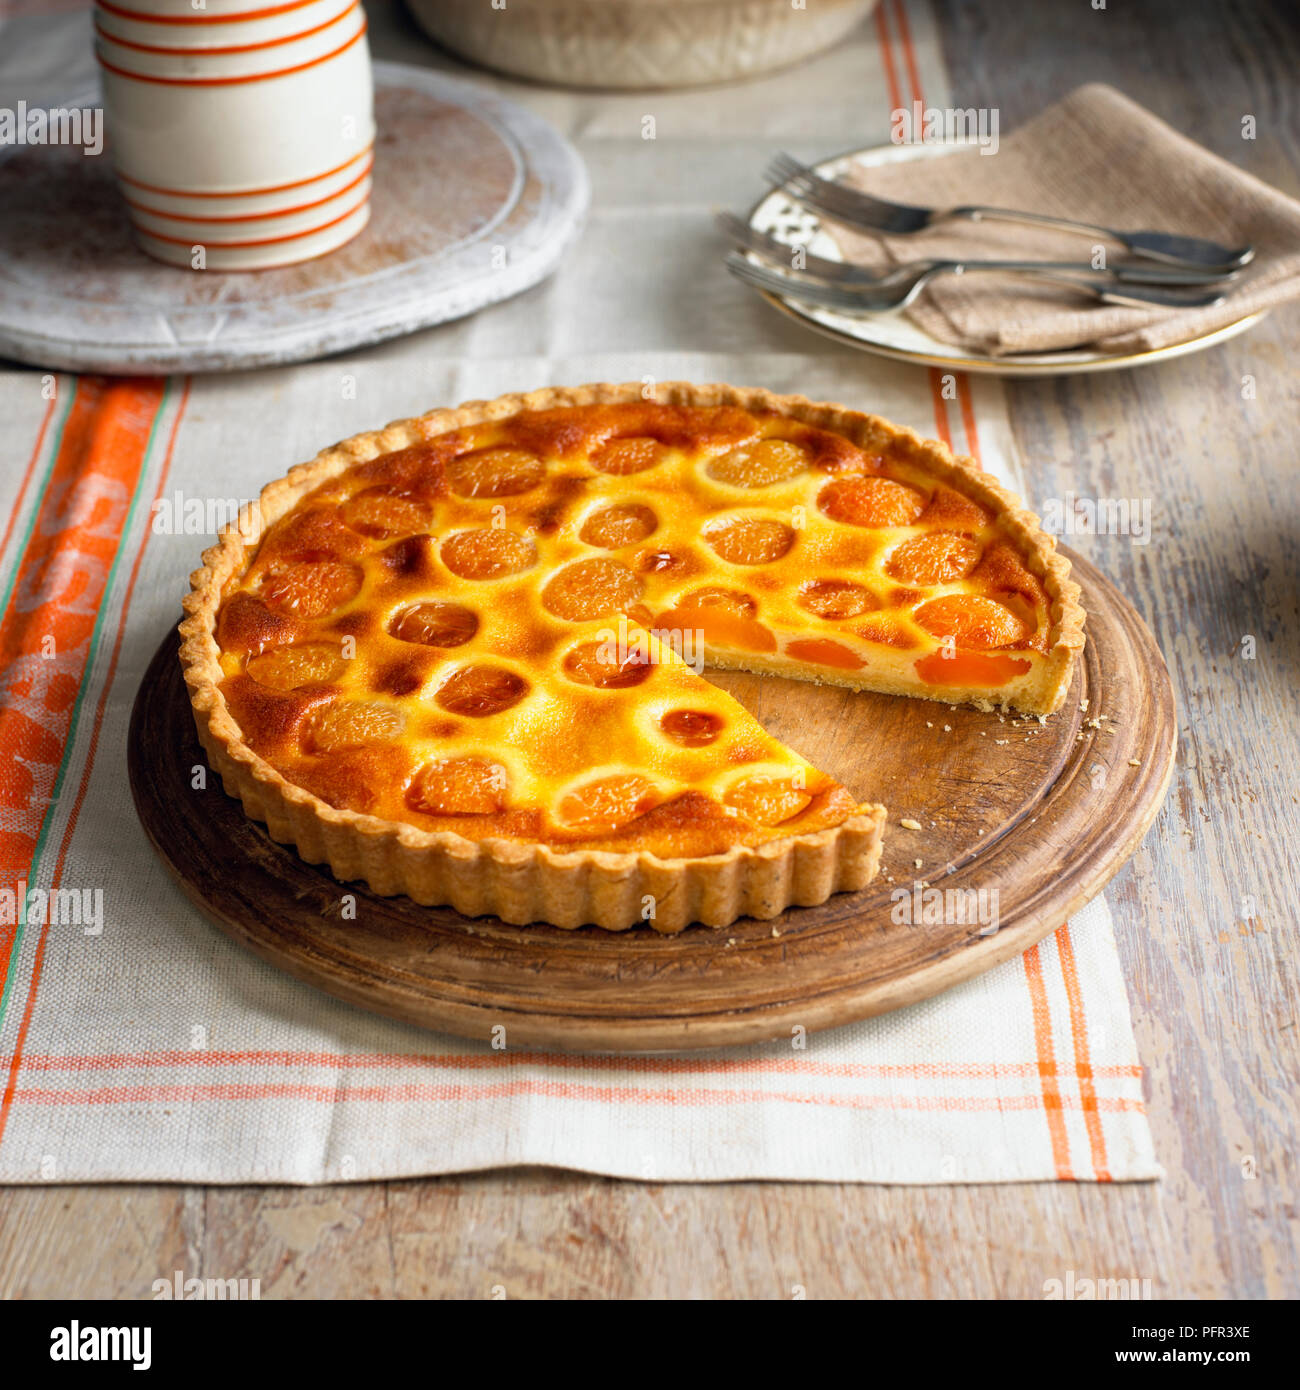 Apricot tart with slice missing Stock Photo